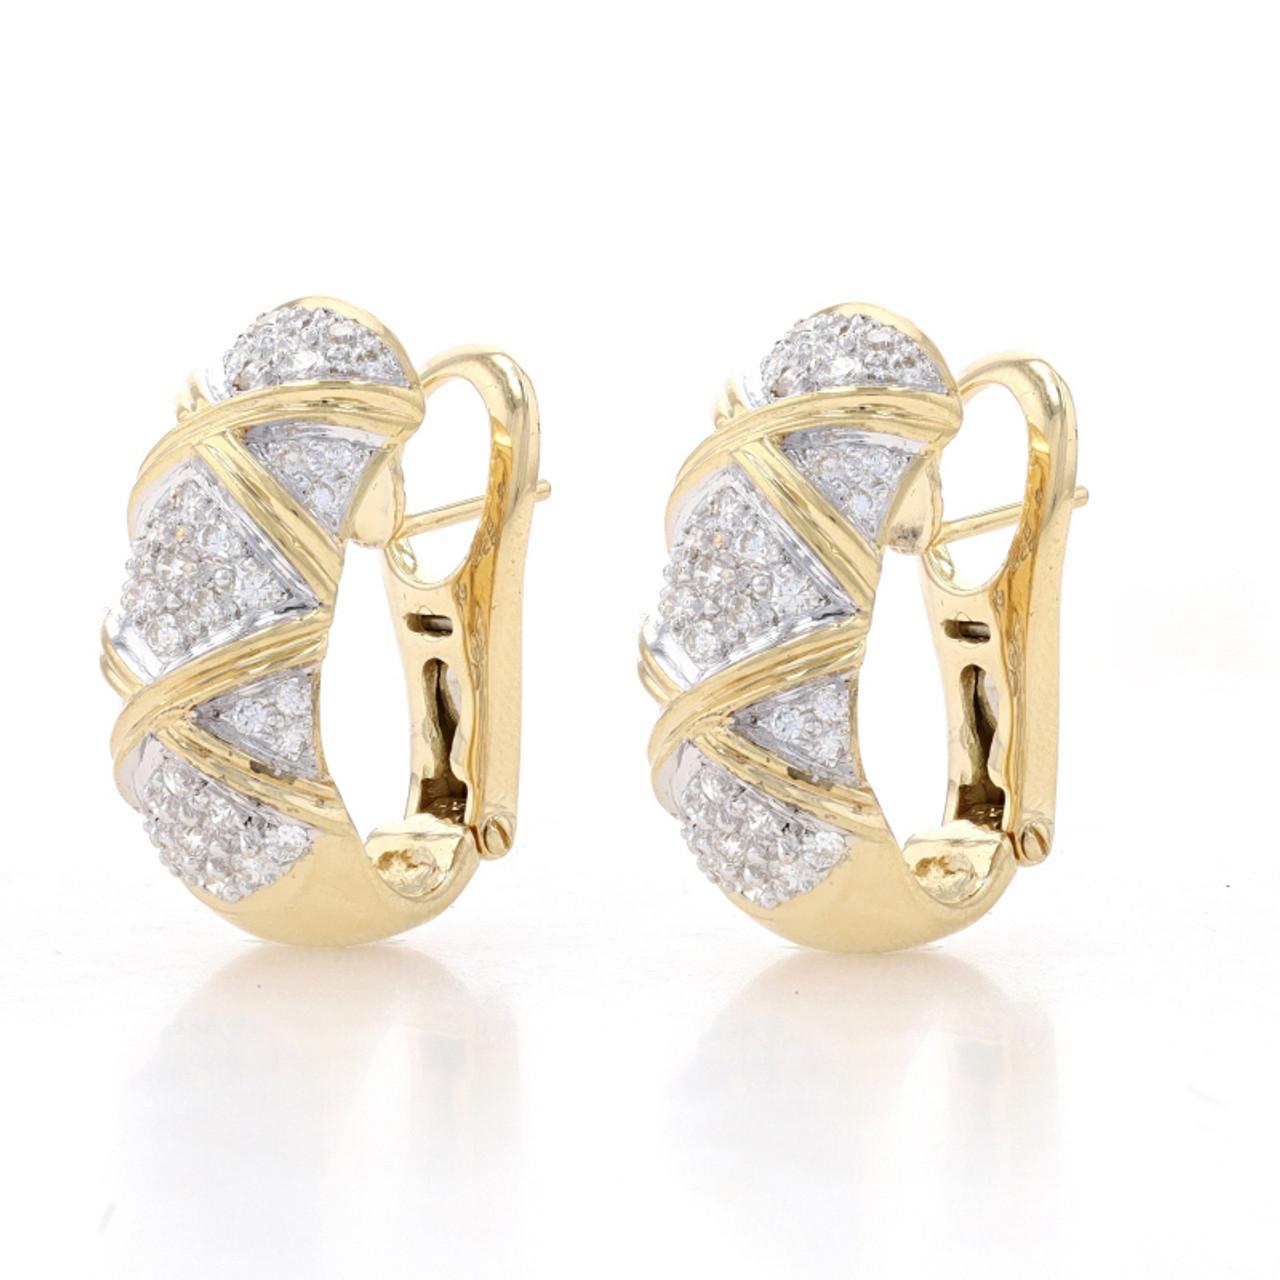 Yellow Gold Pavé Diamond Cluster J-Hoop Earrings 18k 1.20ctw Crossover Lattice

Stone Information
Natural Diamonds
Carat(s): 1.20ctw
Cut: Round Brilliant
Color: G - H
Clarity: VS2 - SI1

Total Carats: 1.20ctw

Additional information:
Material: Metal